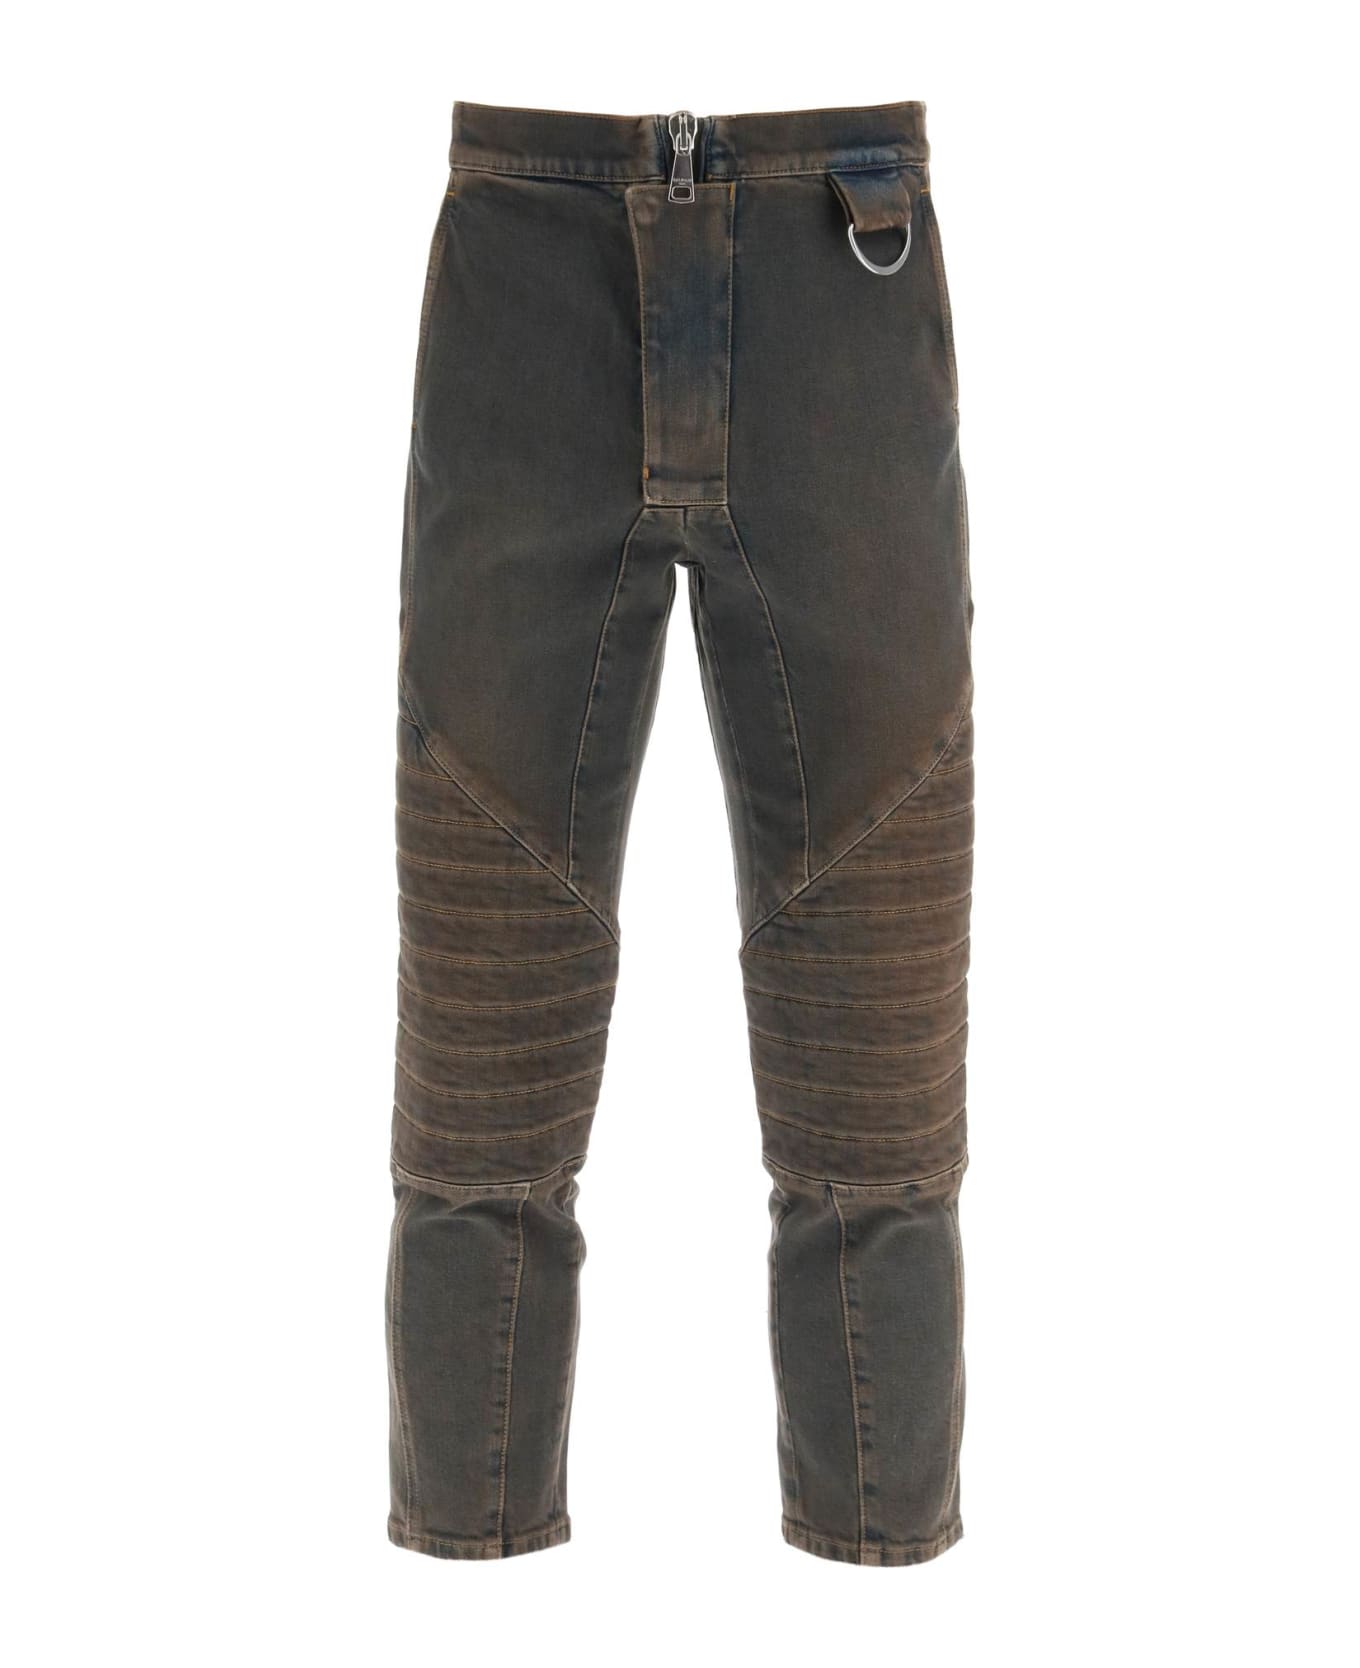 Balmain Stretch Jeans With Quilted And Padded Inserts - BLEU JEAN DIRTY (Brown) デニム